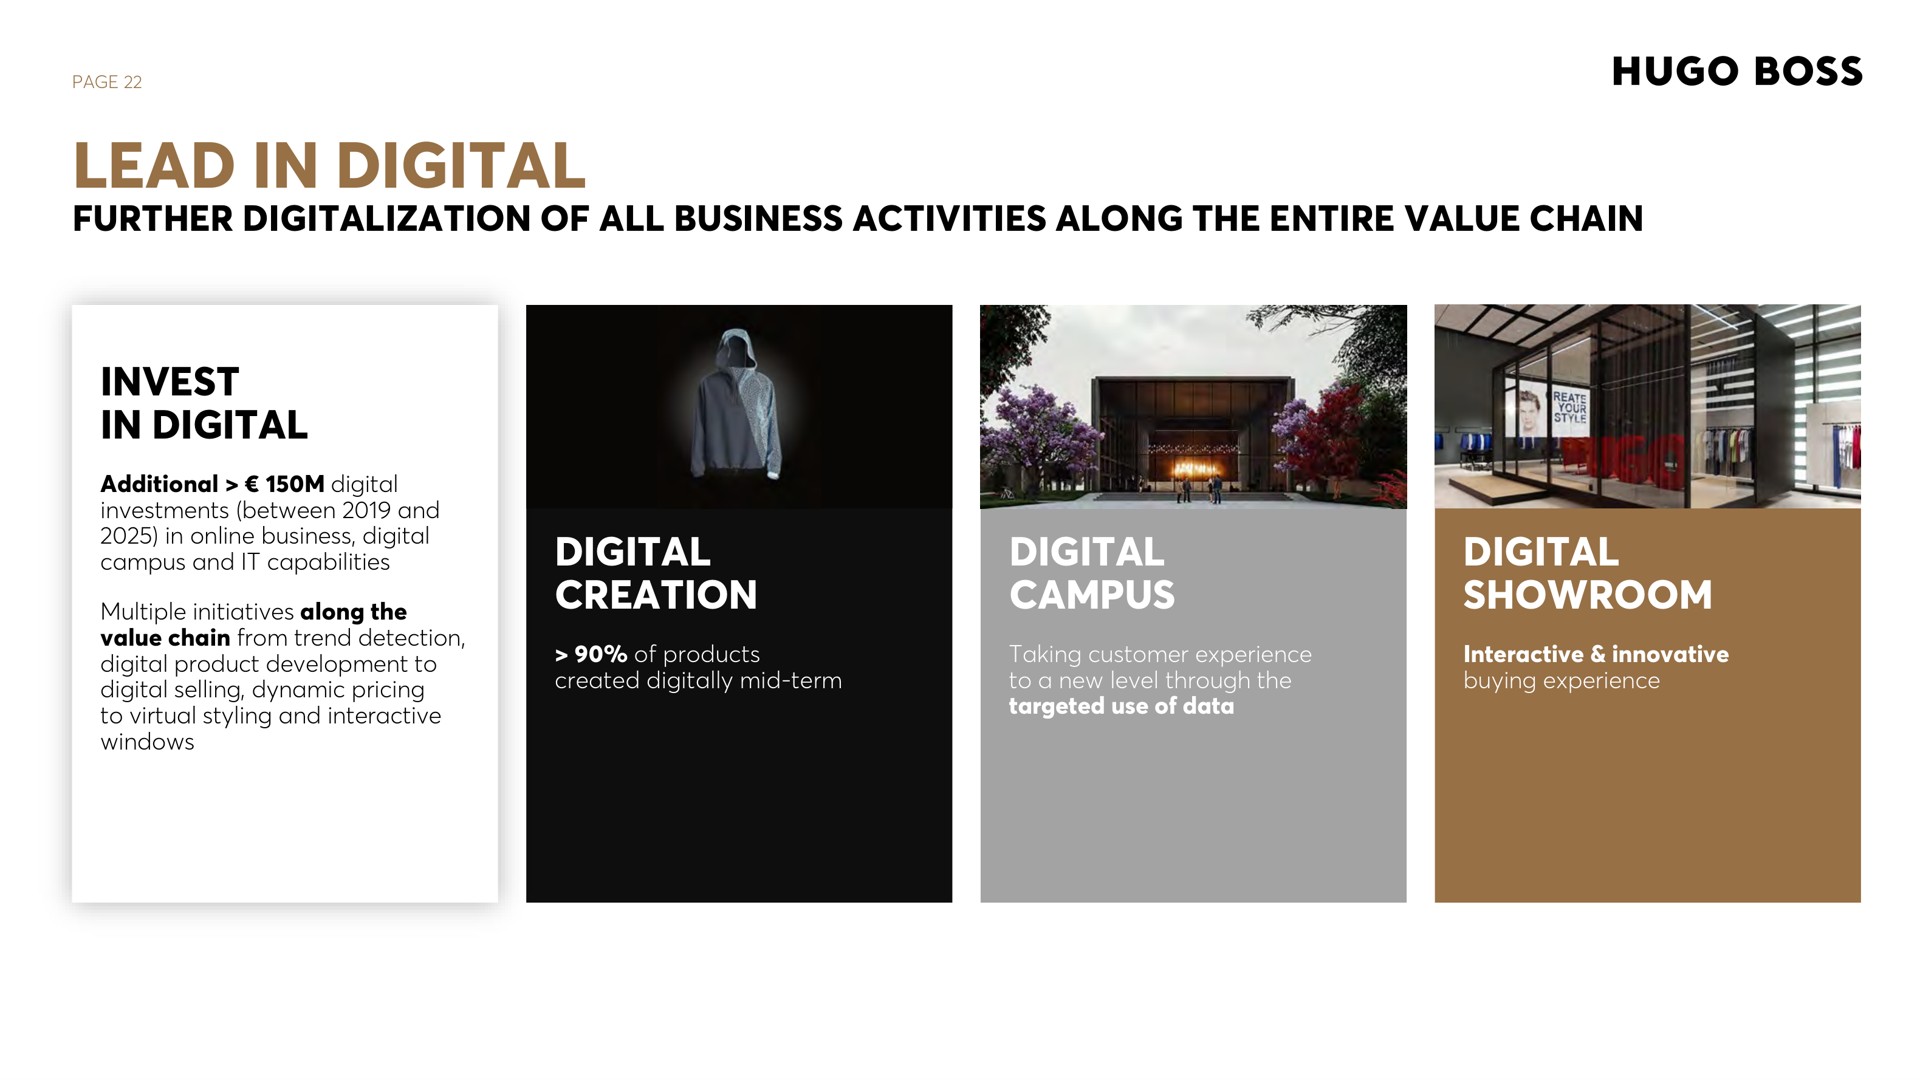 page lead in digital further digitalization of all business activities along the entire value chain invest in digital additional digital investments between and in business digital campus and it capabilities multiple initiatives along the value chain from trend detection digital product development to digital selling dynamic pricing to virtual styling and interactive windows digital creation of products created digitally mid term digital campus taking customer experience to a new level through the targeted use of data digital showroom interactive innovative buying experience | Hugo Boss